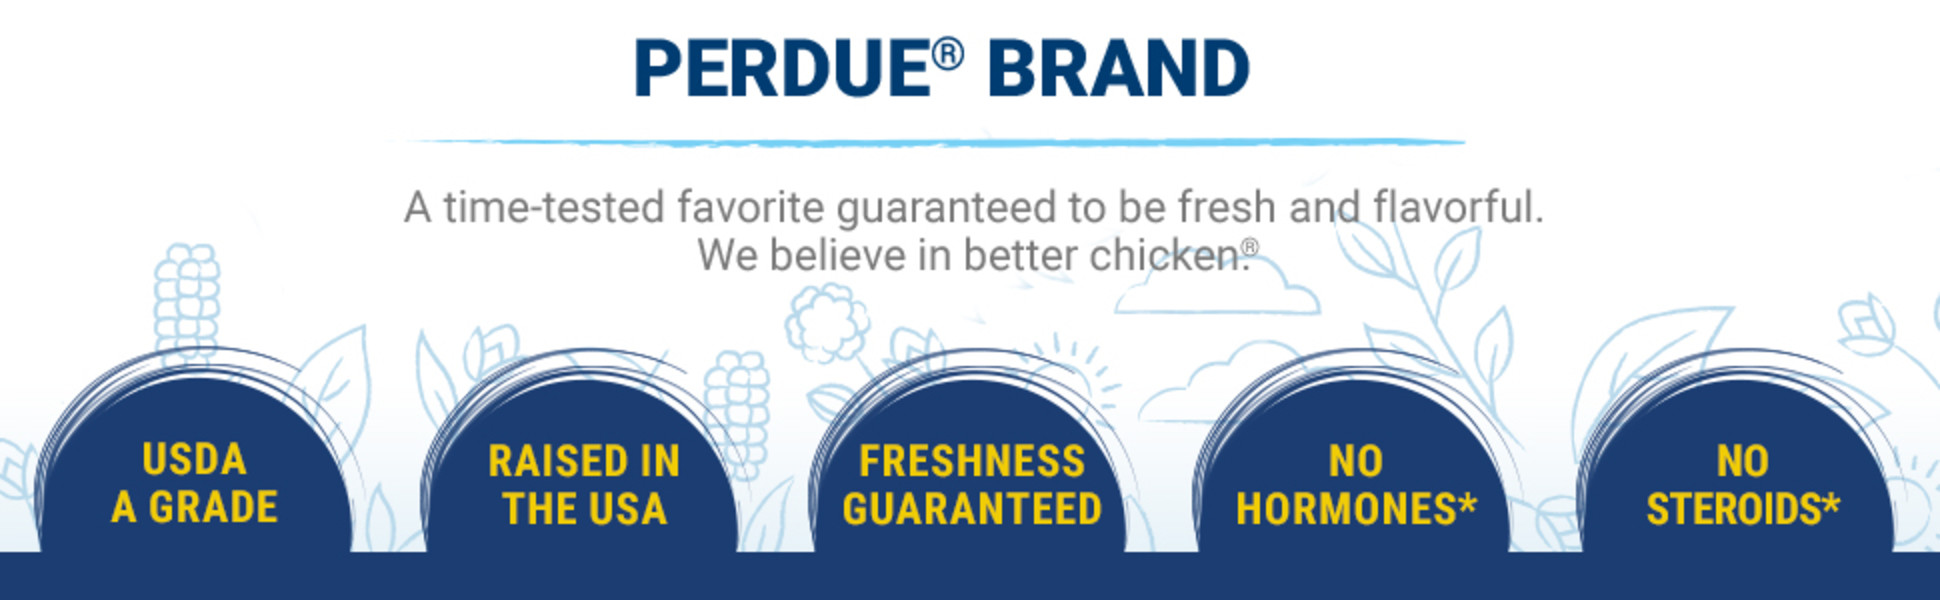 PERDUE® ORGANIC Free Range Whole Chicken with Giblets